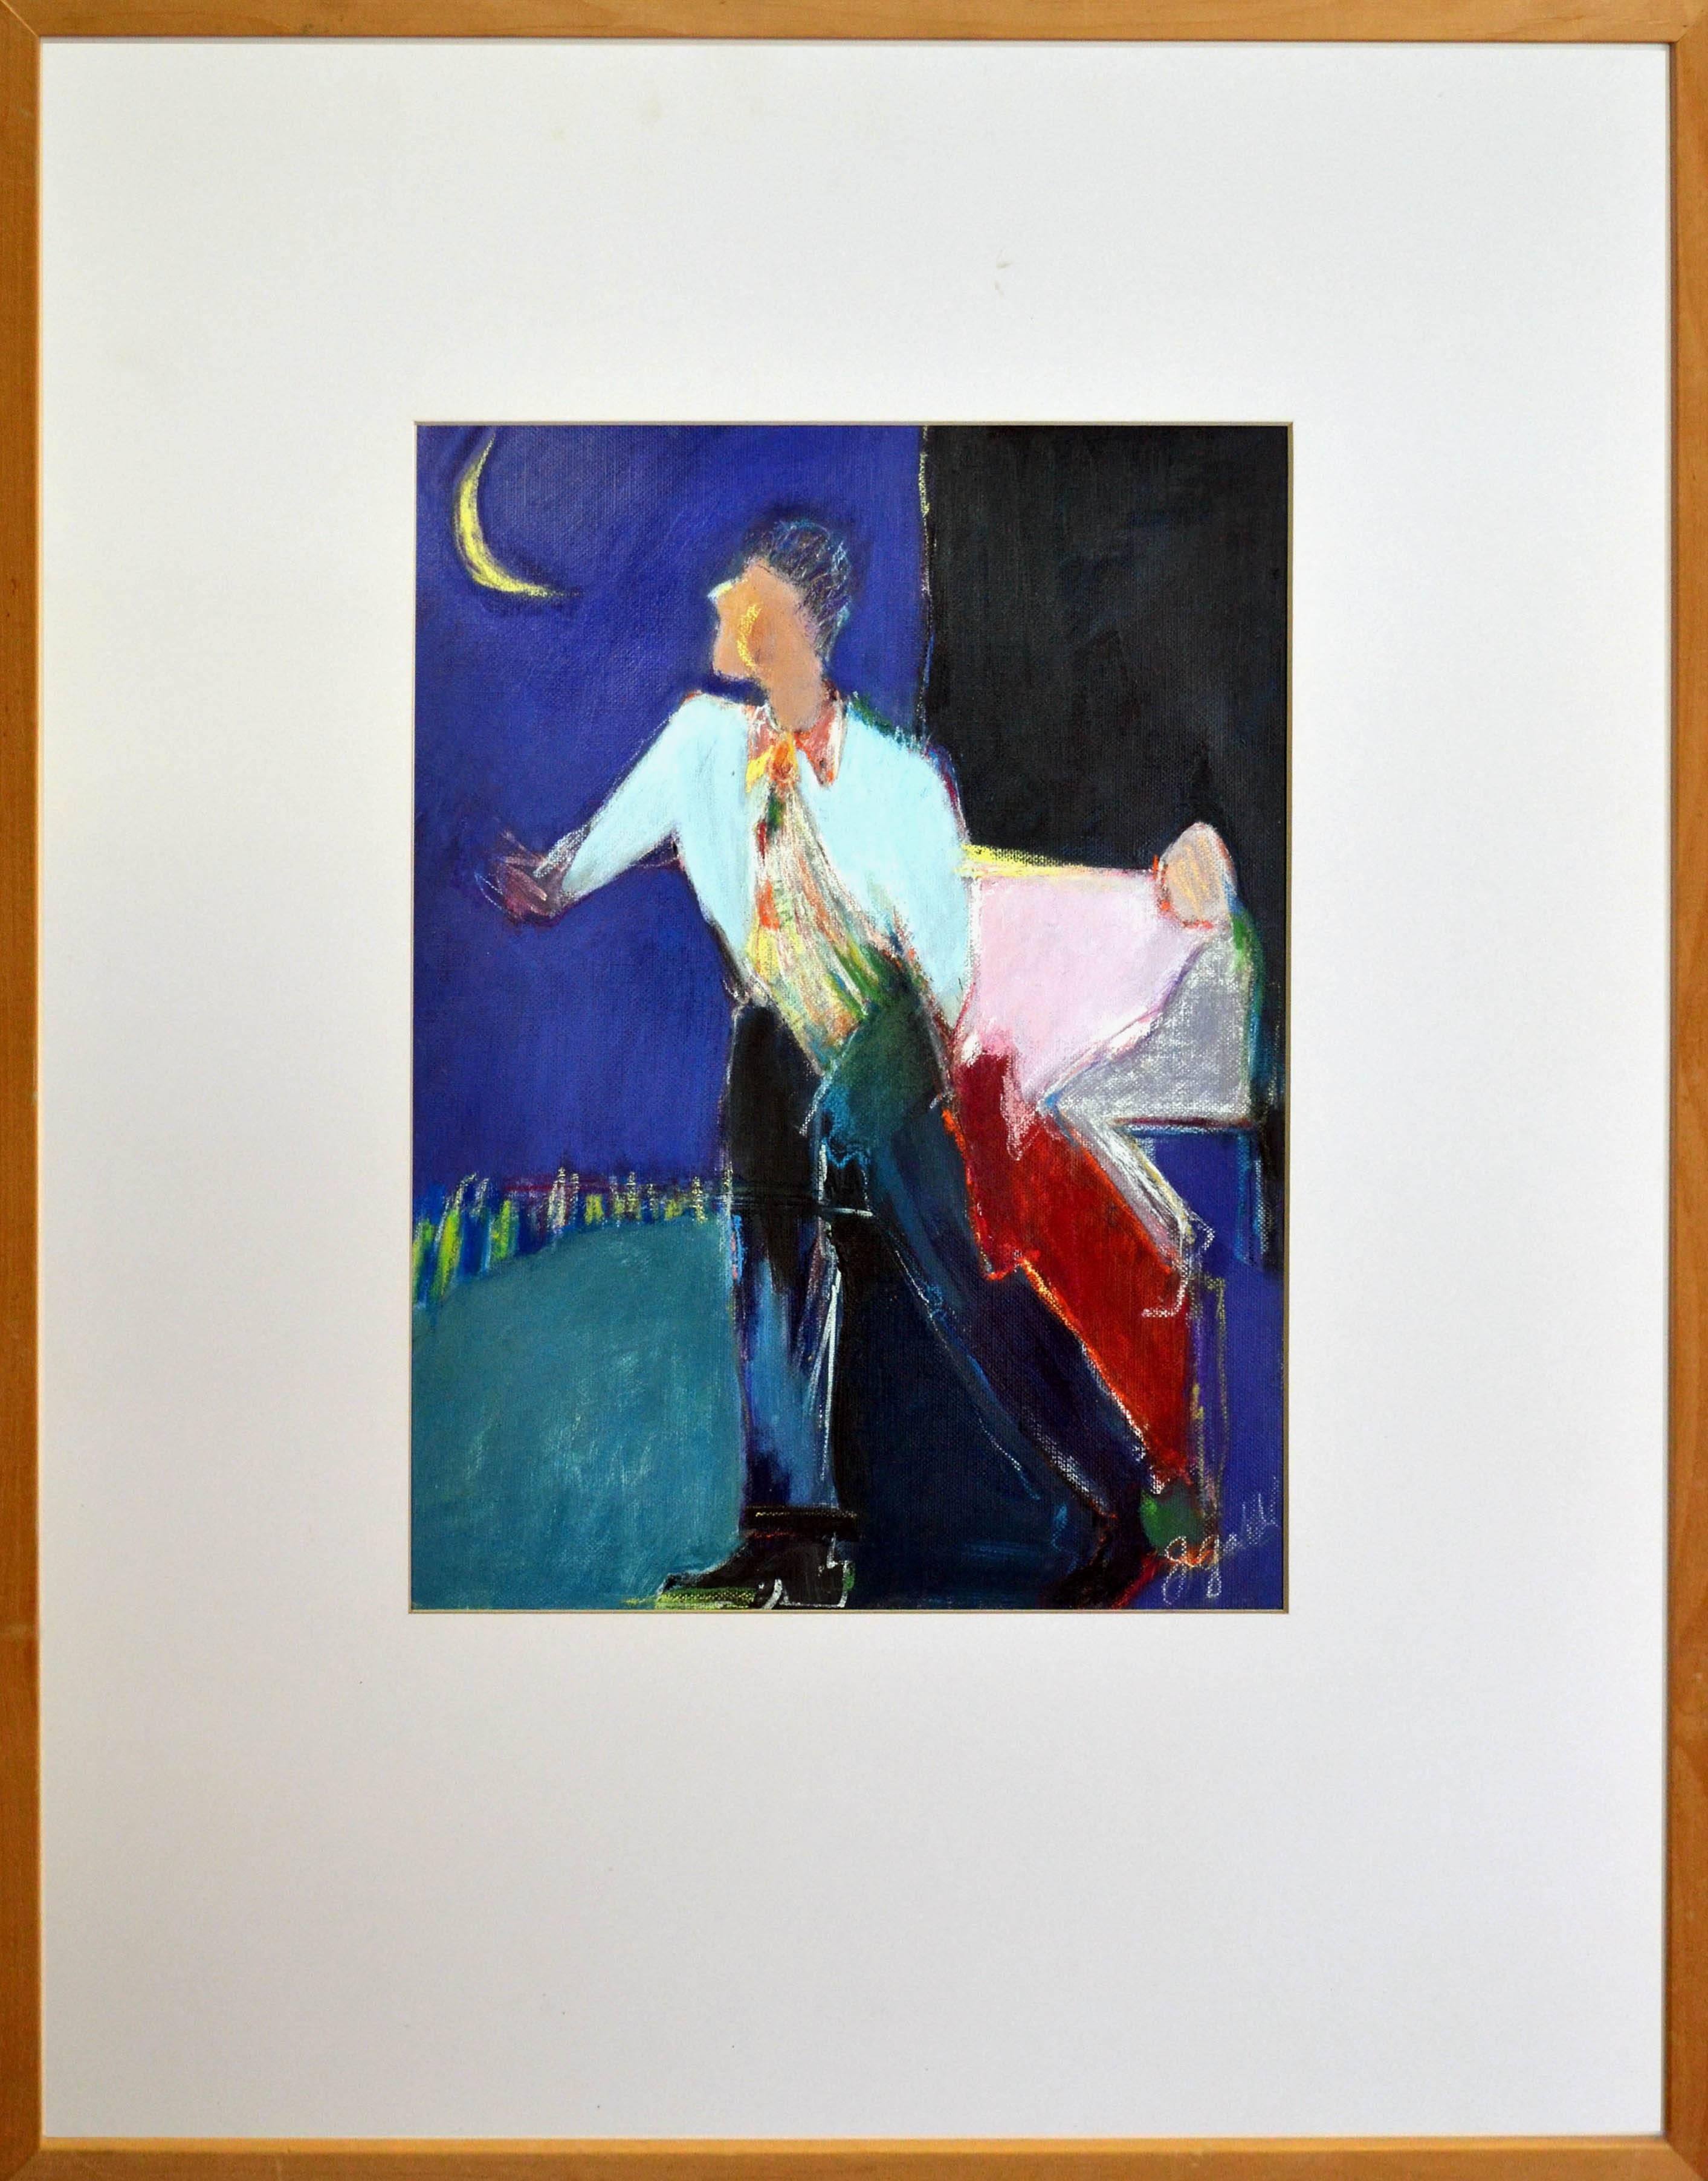 Man With Moon - Figurative Abstract  - Painting by J Gold